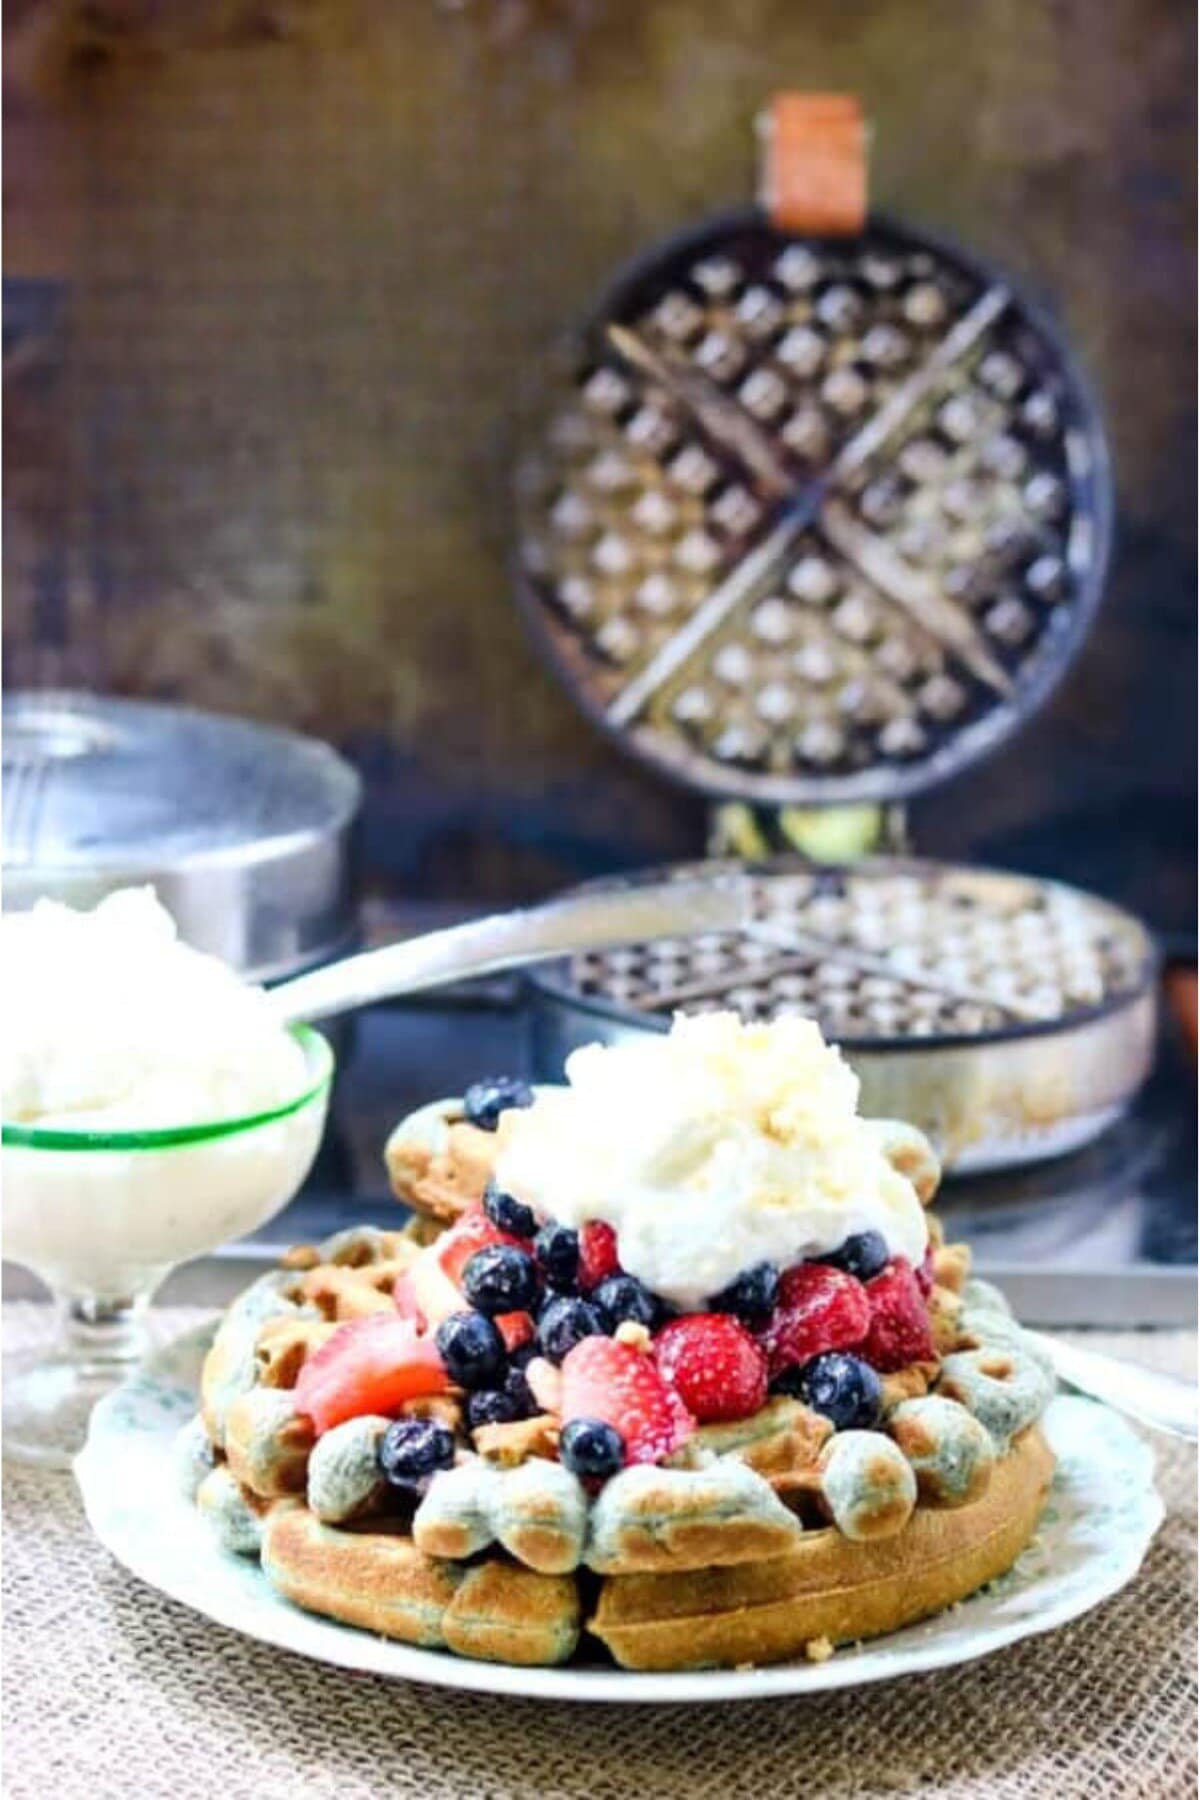 Blue cornmeal waffles with strawberries and blueberries on top.